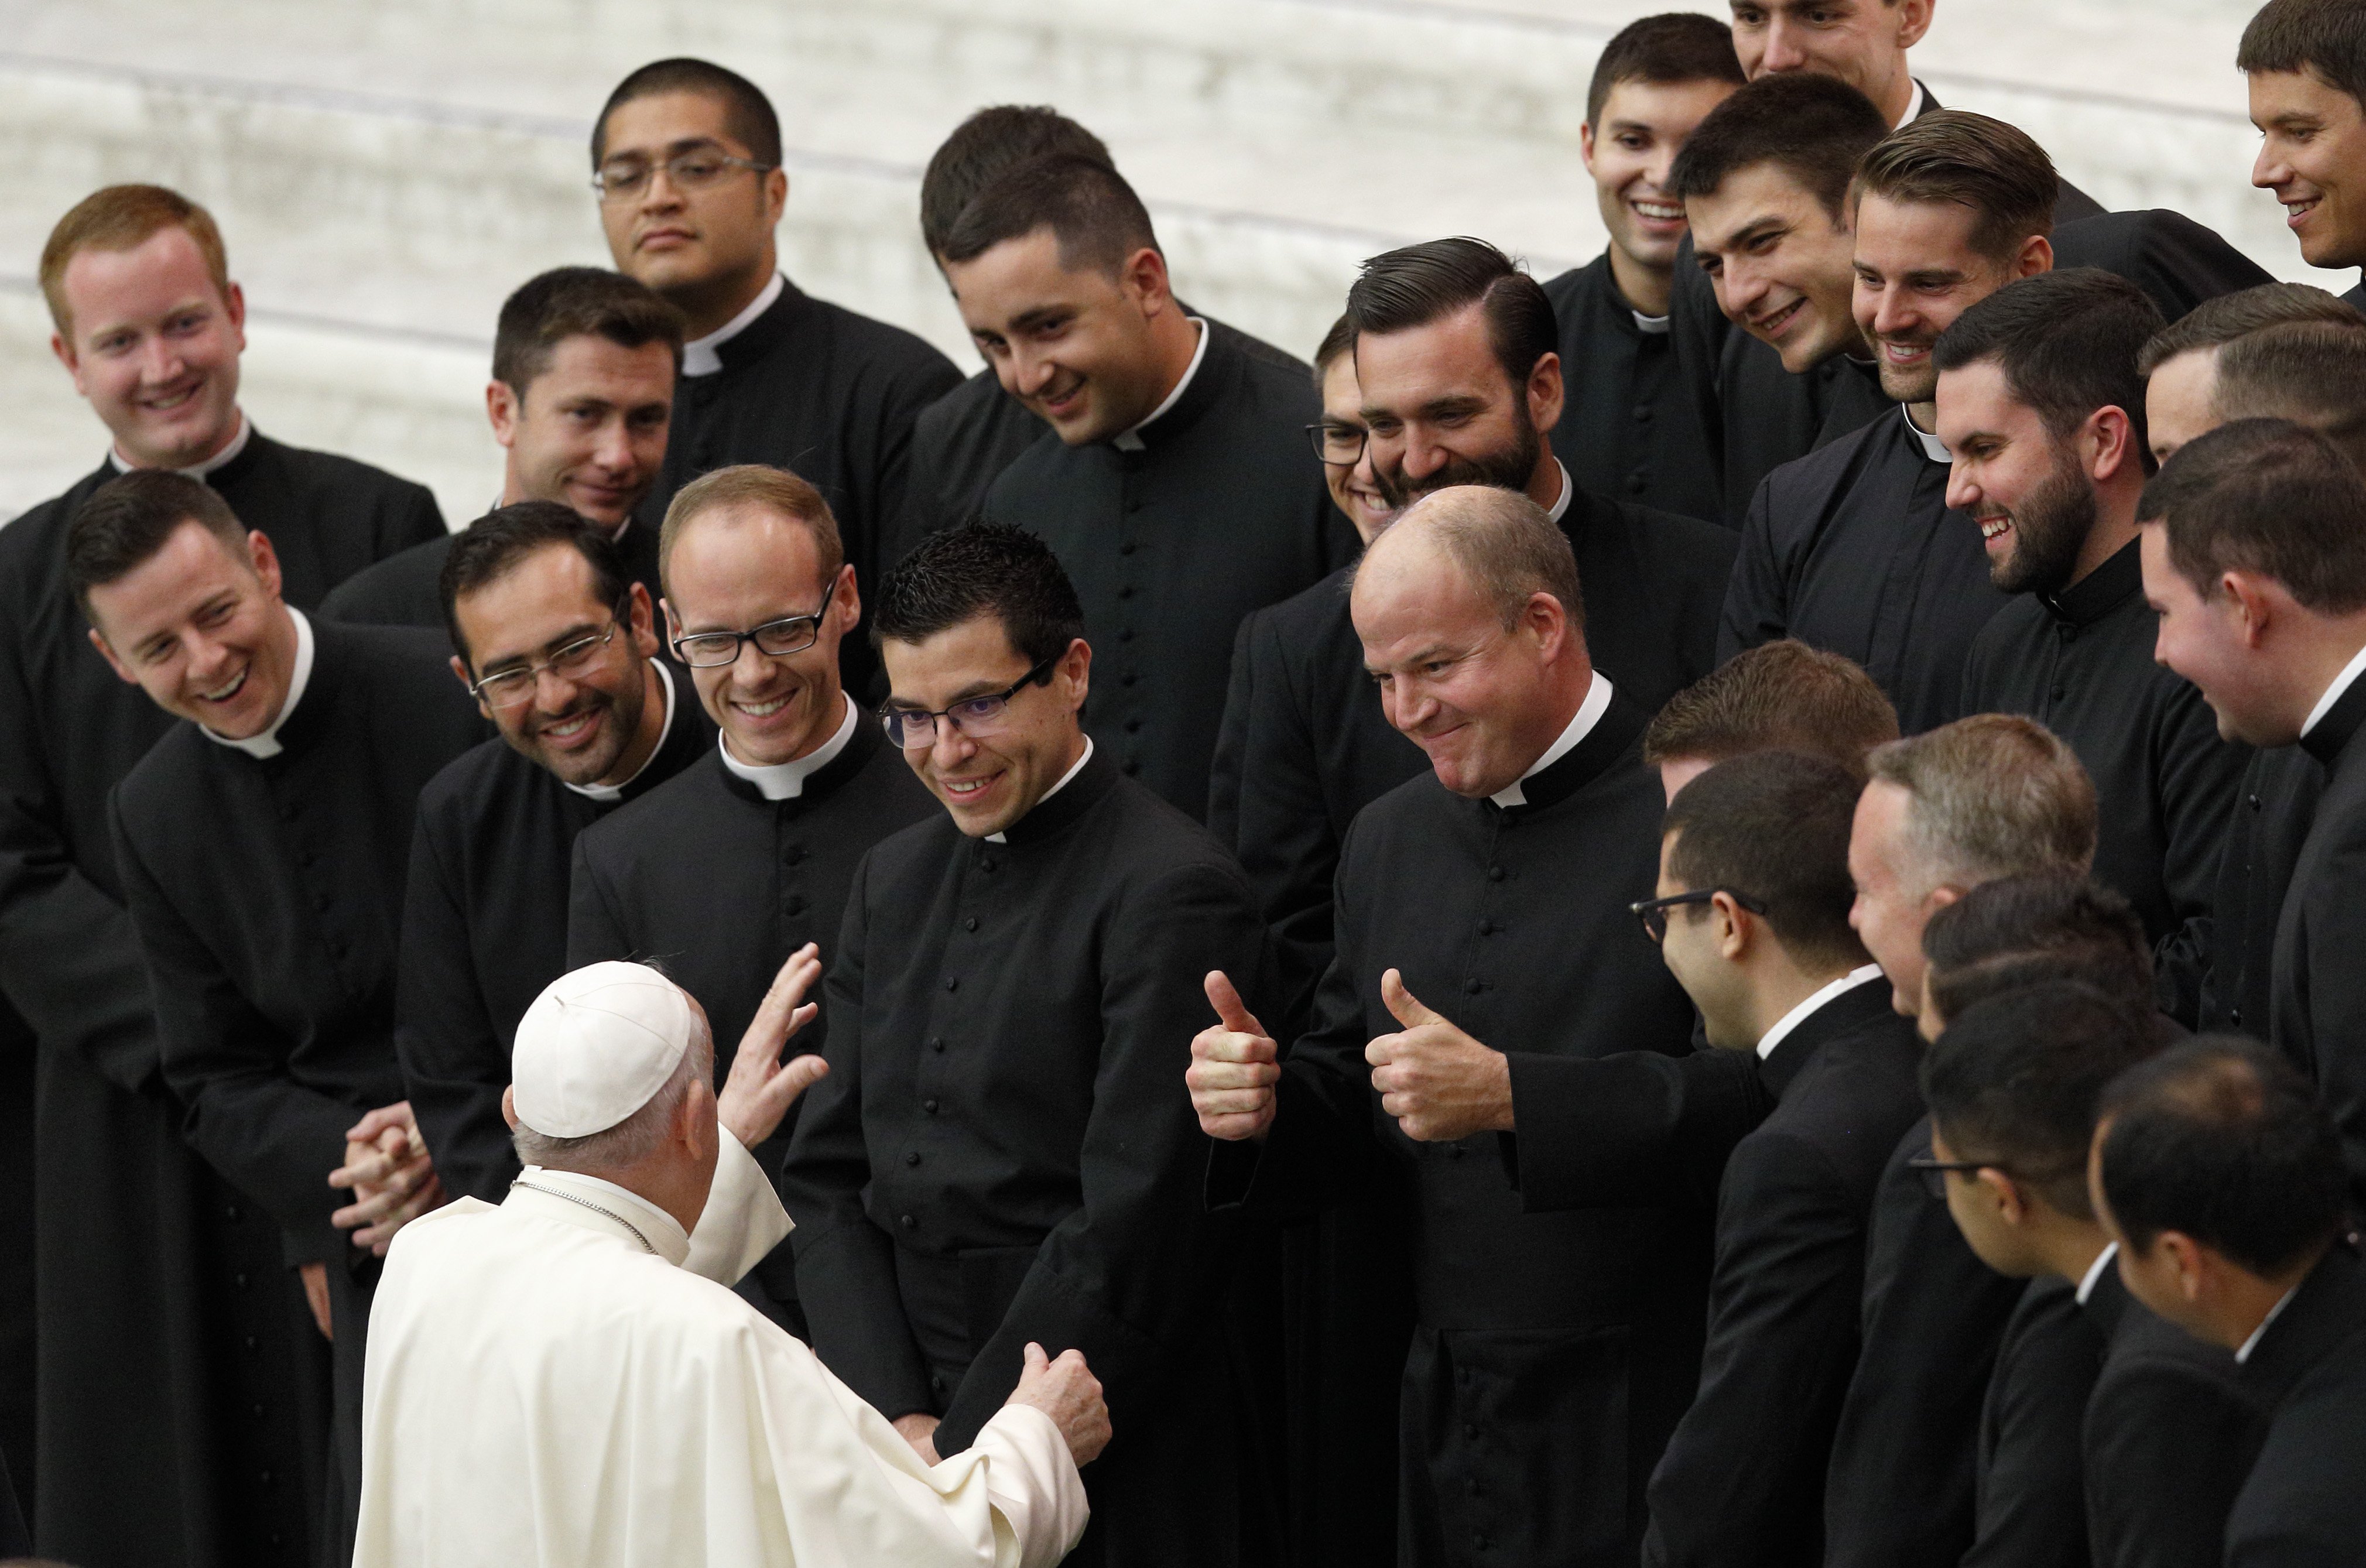 Pope Francis greets seminarians from the Pontifical North American College during his general audience in the Paul VI hall at the Vatican Sept. 29, 2021. Father Peter Harman, rector of the U.S. seminary, is seen giving a thumbs up. (CNS photo/Paul Haring)